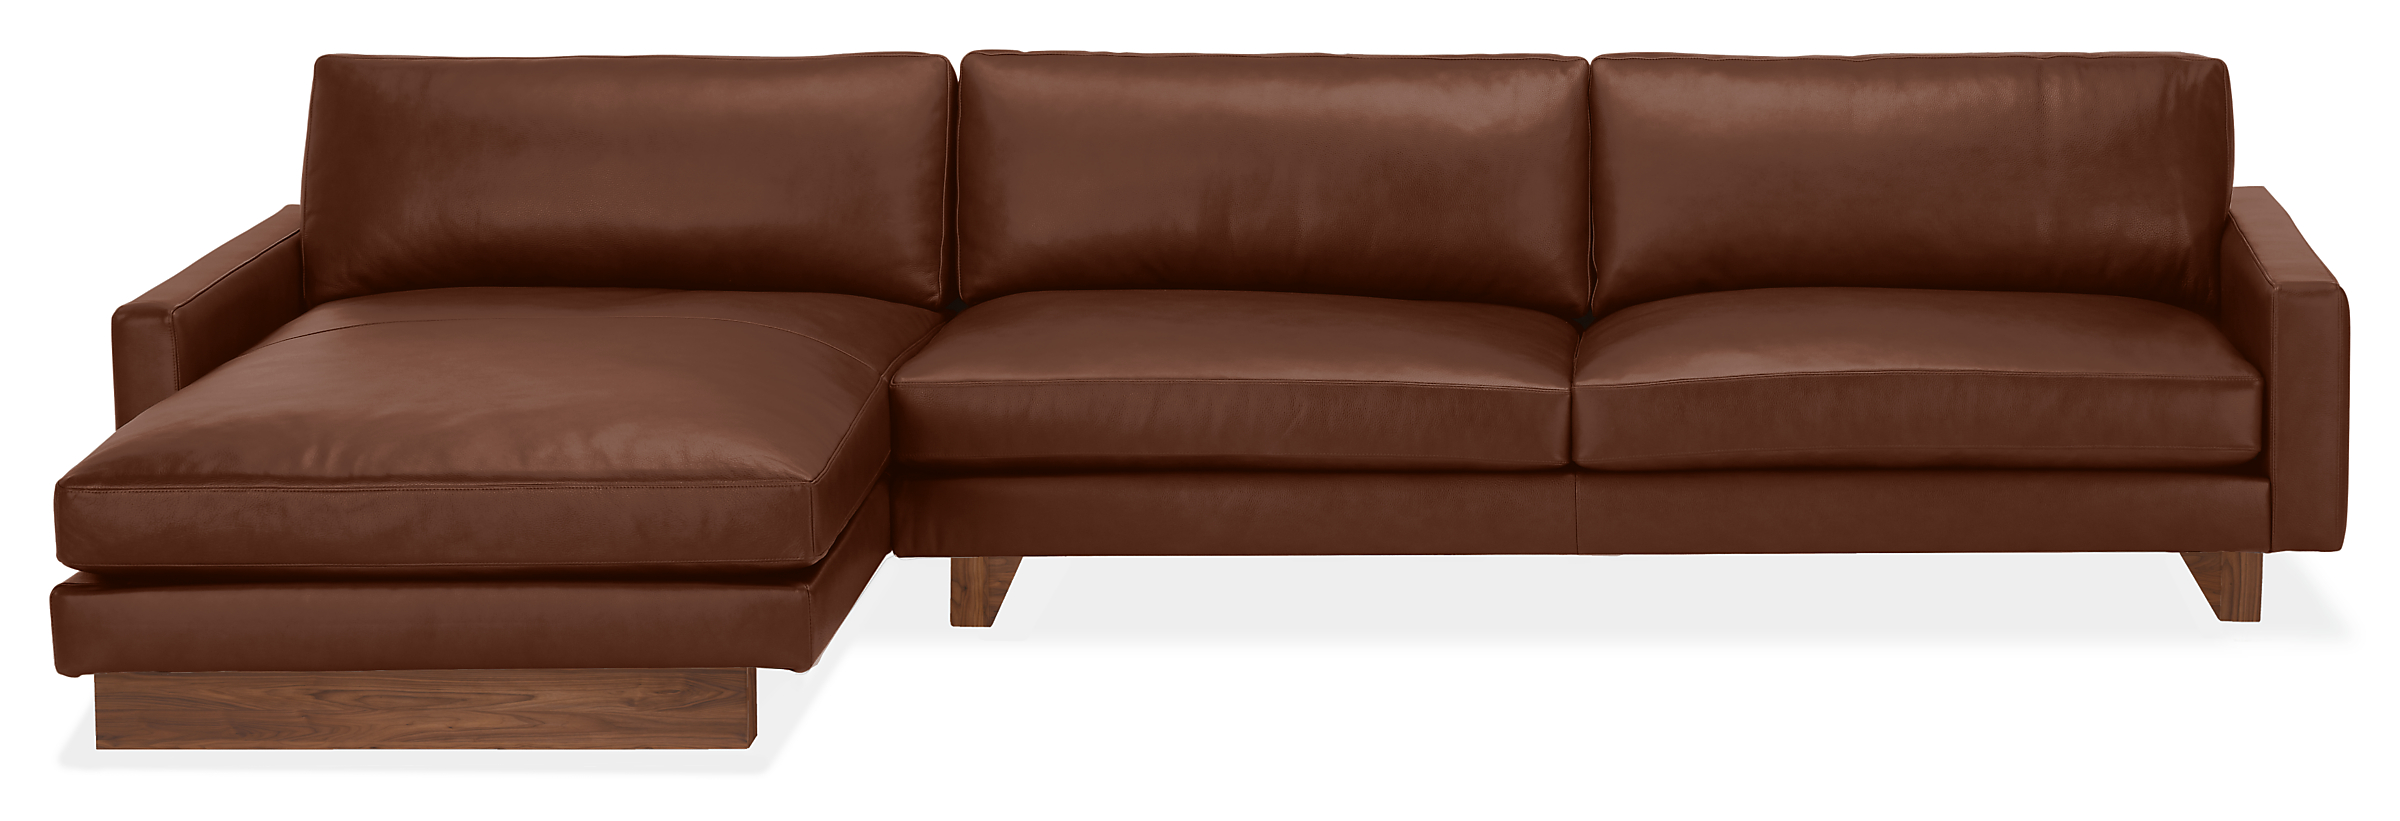 Pierson Leather Sofas with Chaise